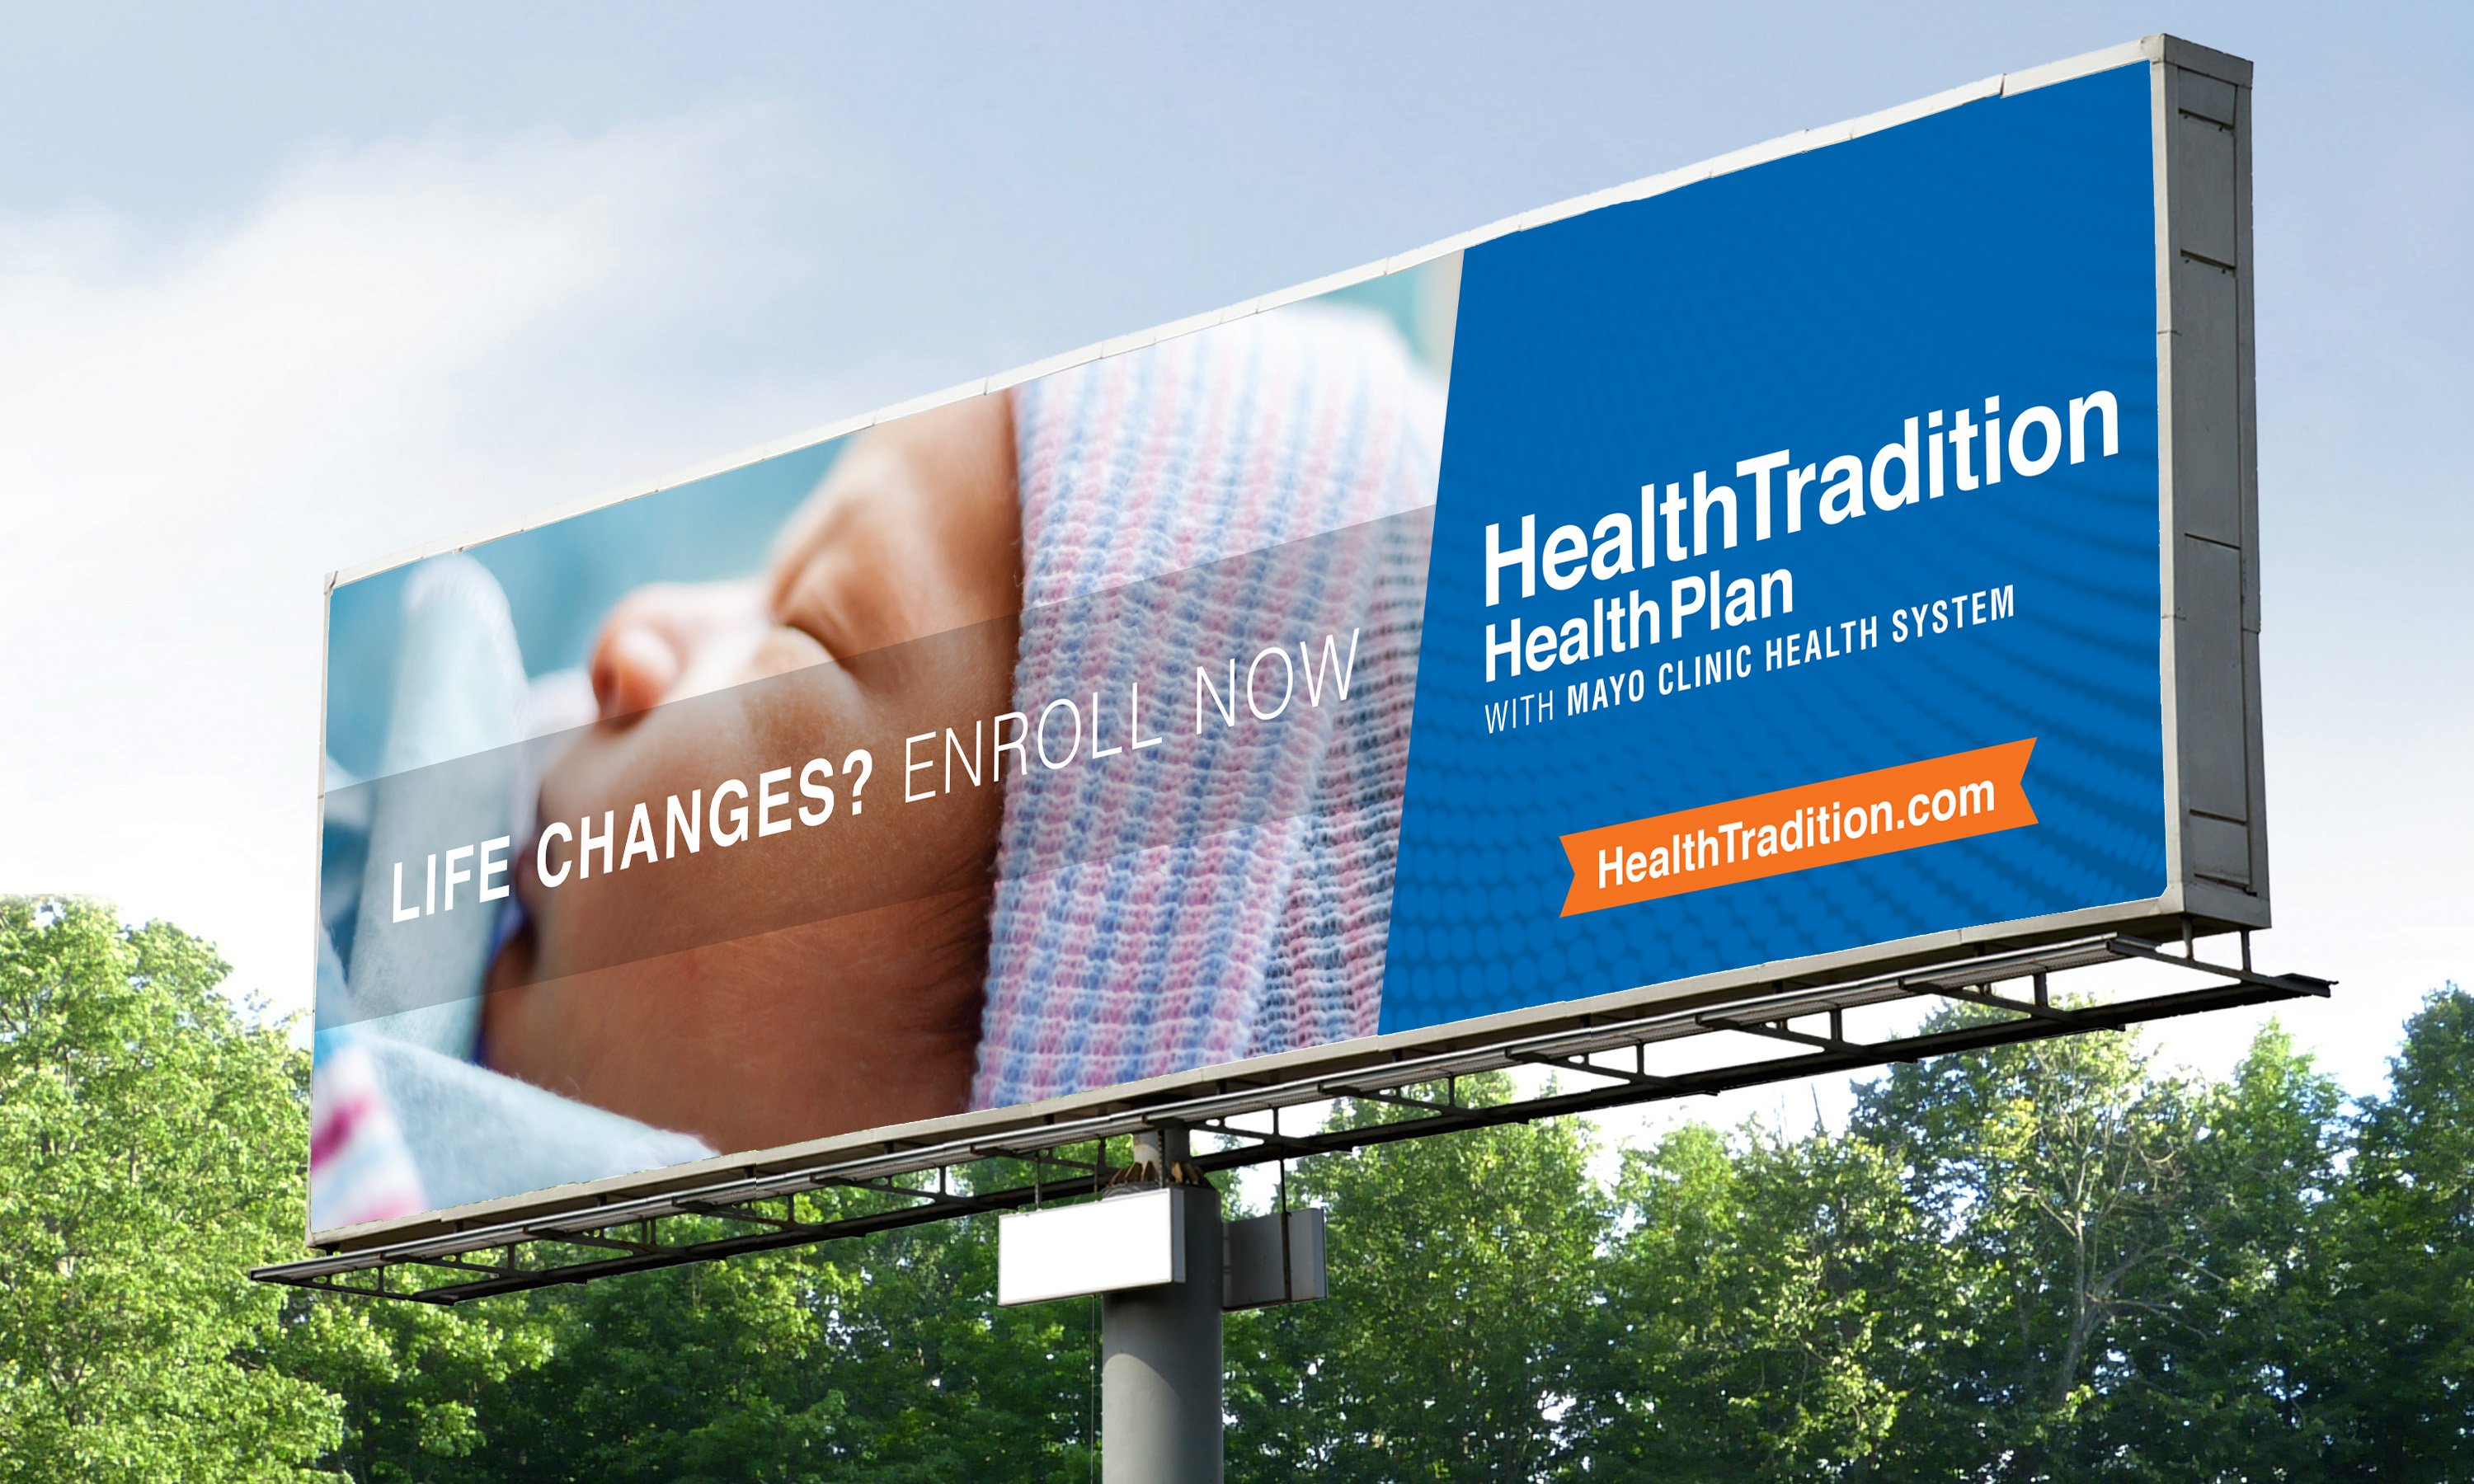 Health Tradition Life Changes billboard